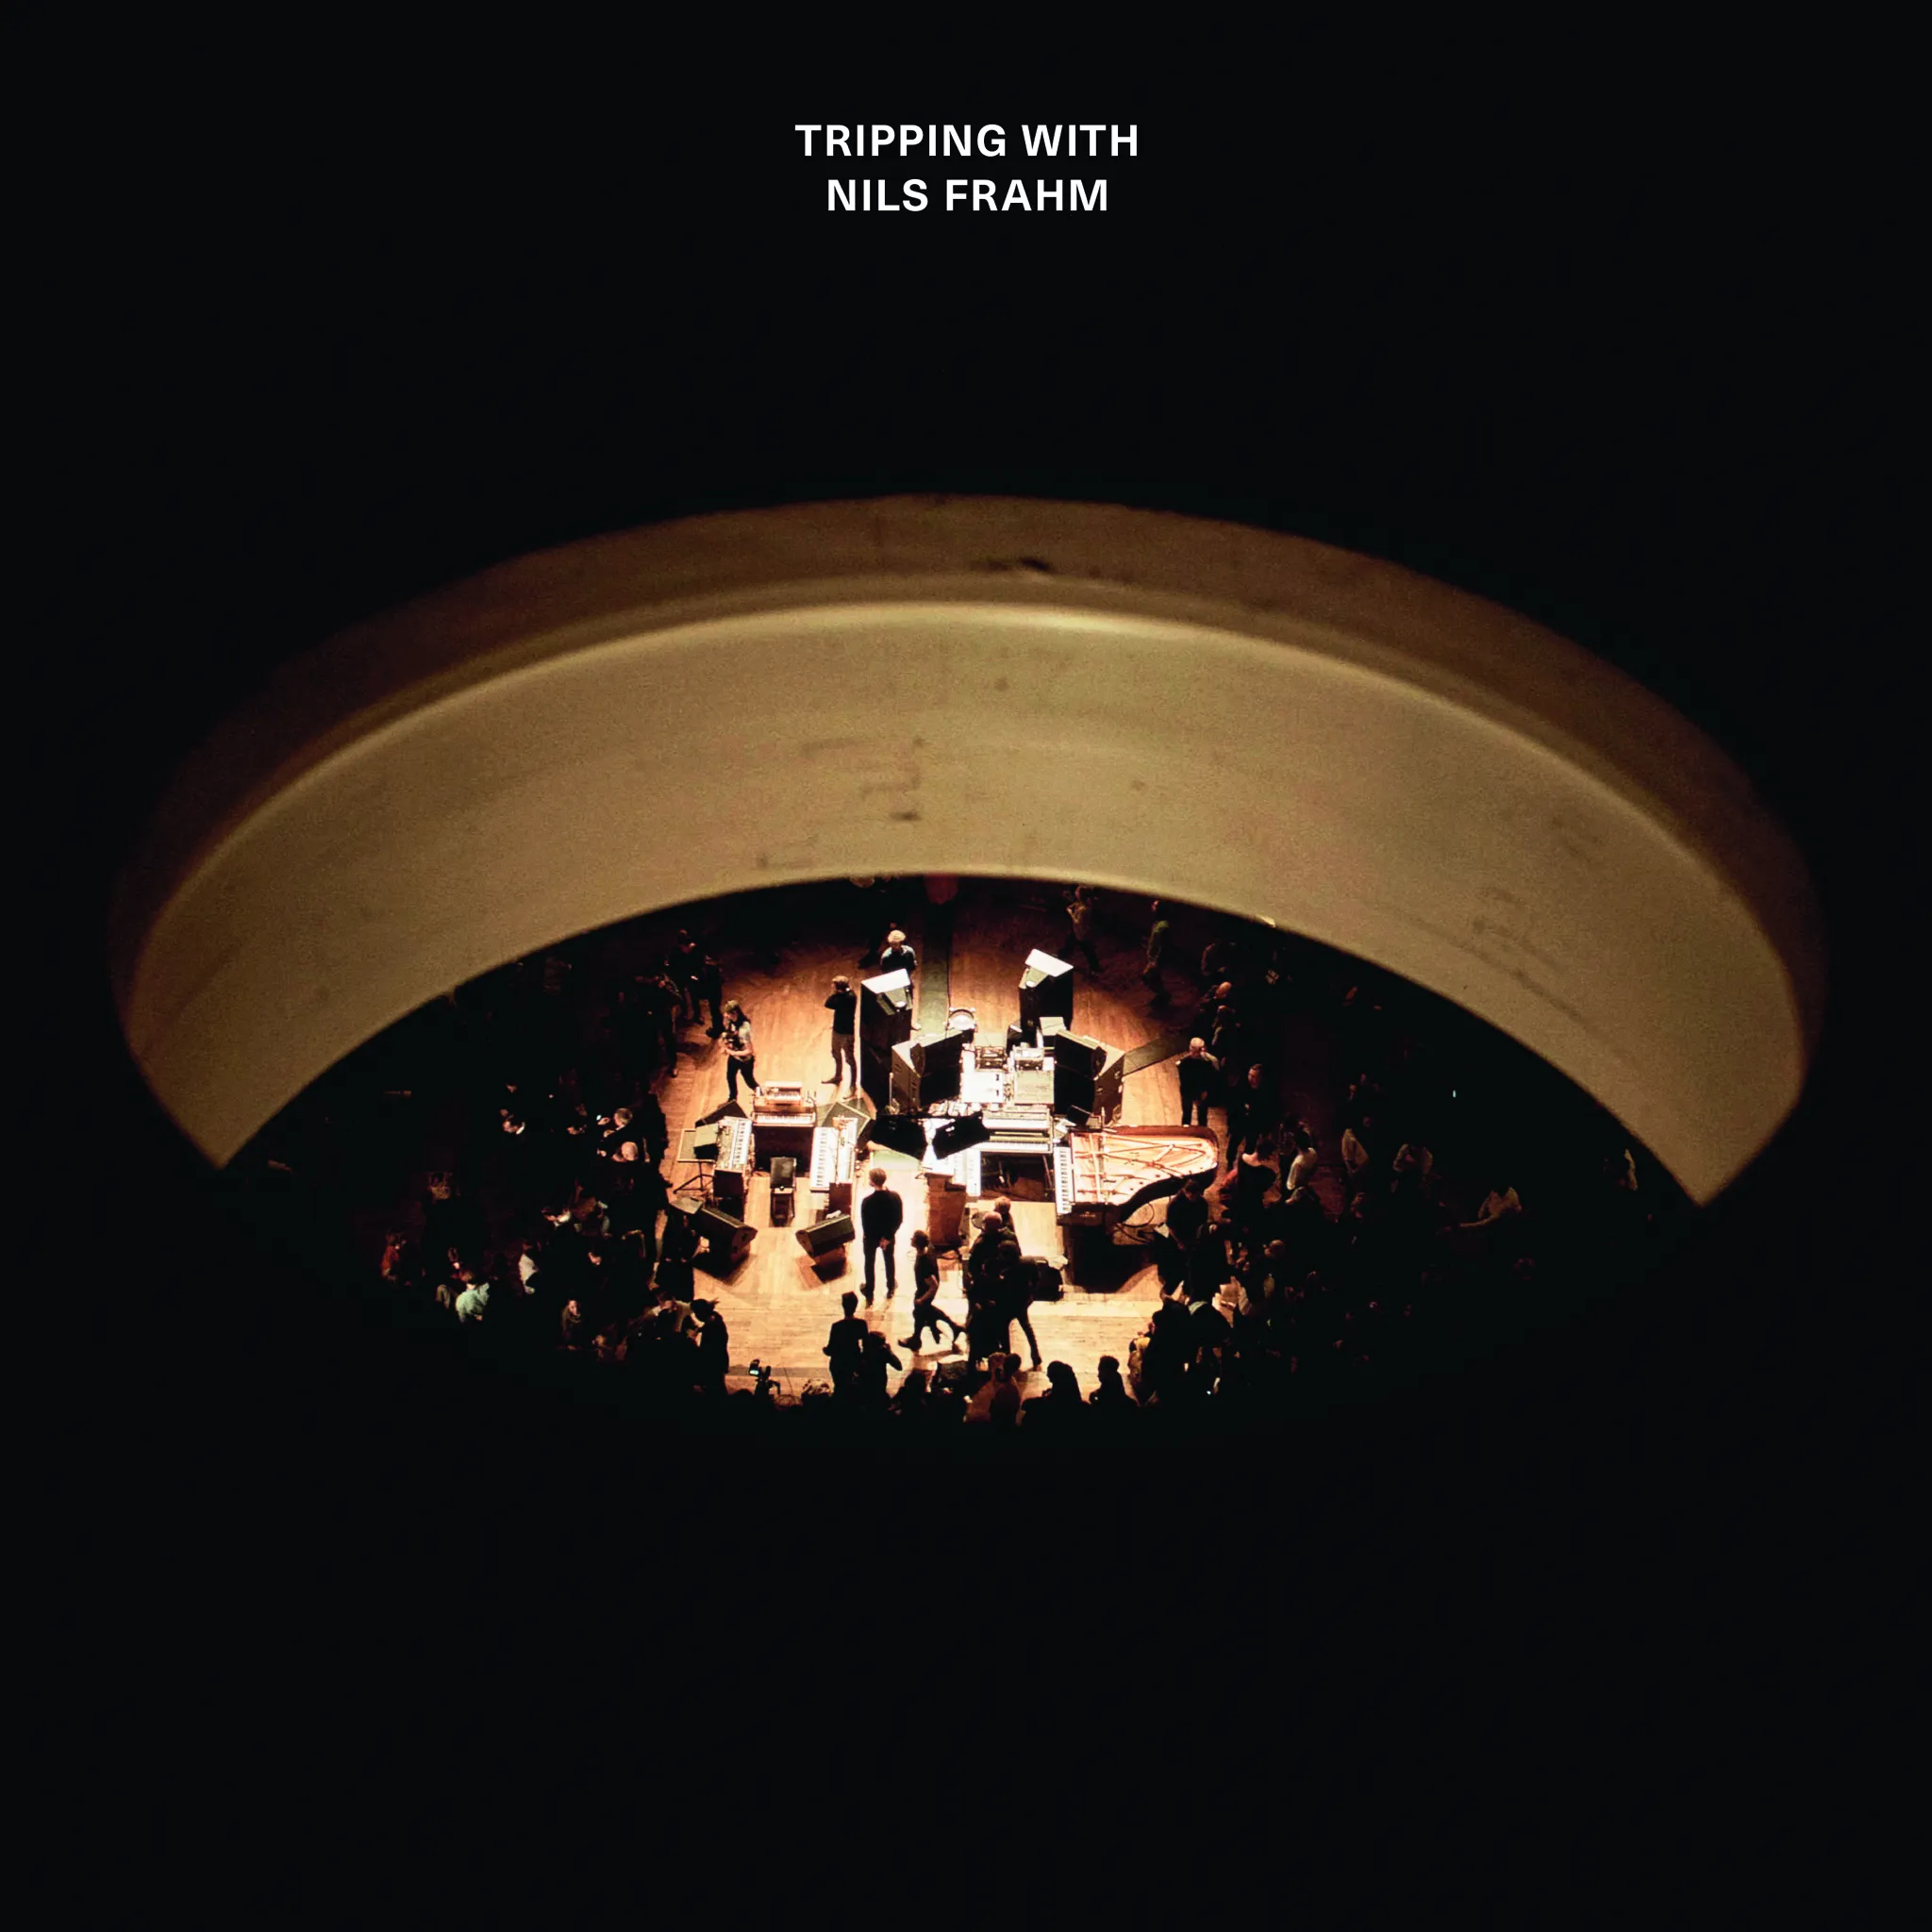 <strong>Nils Frahm - Tripping with Nils Frahm</strong> (Vinyl LP - black)